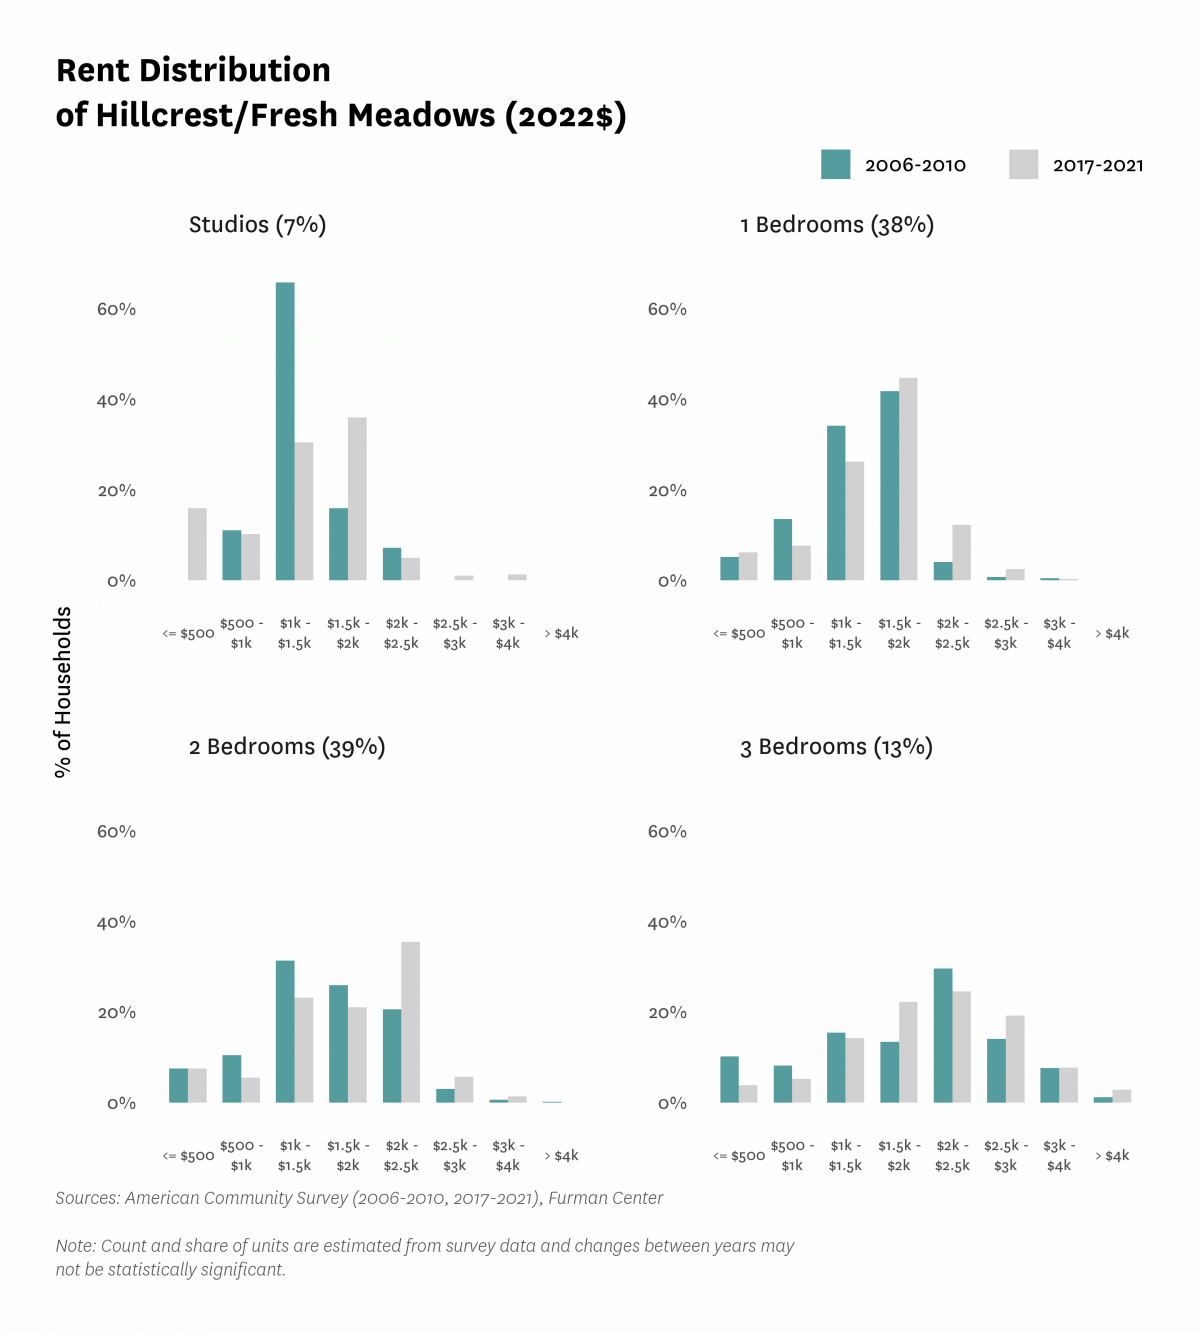 Graph showing the distribution of rents in Hillcrest/Fresh Meadows in both 2010 and 2017-2021.